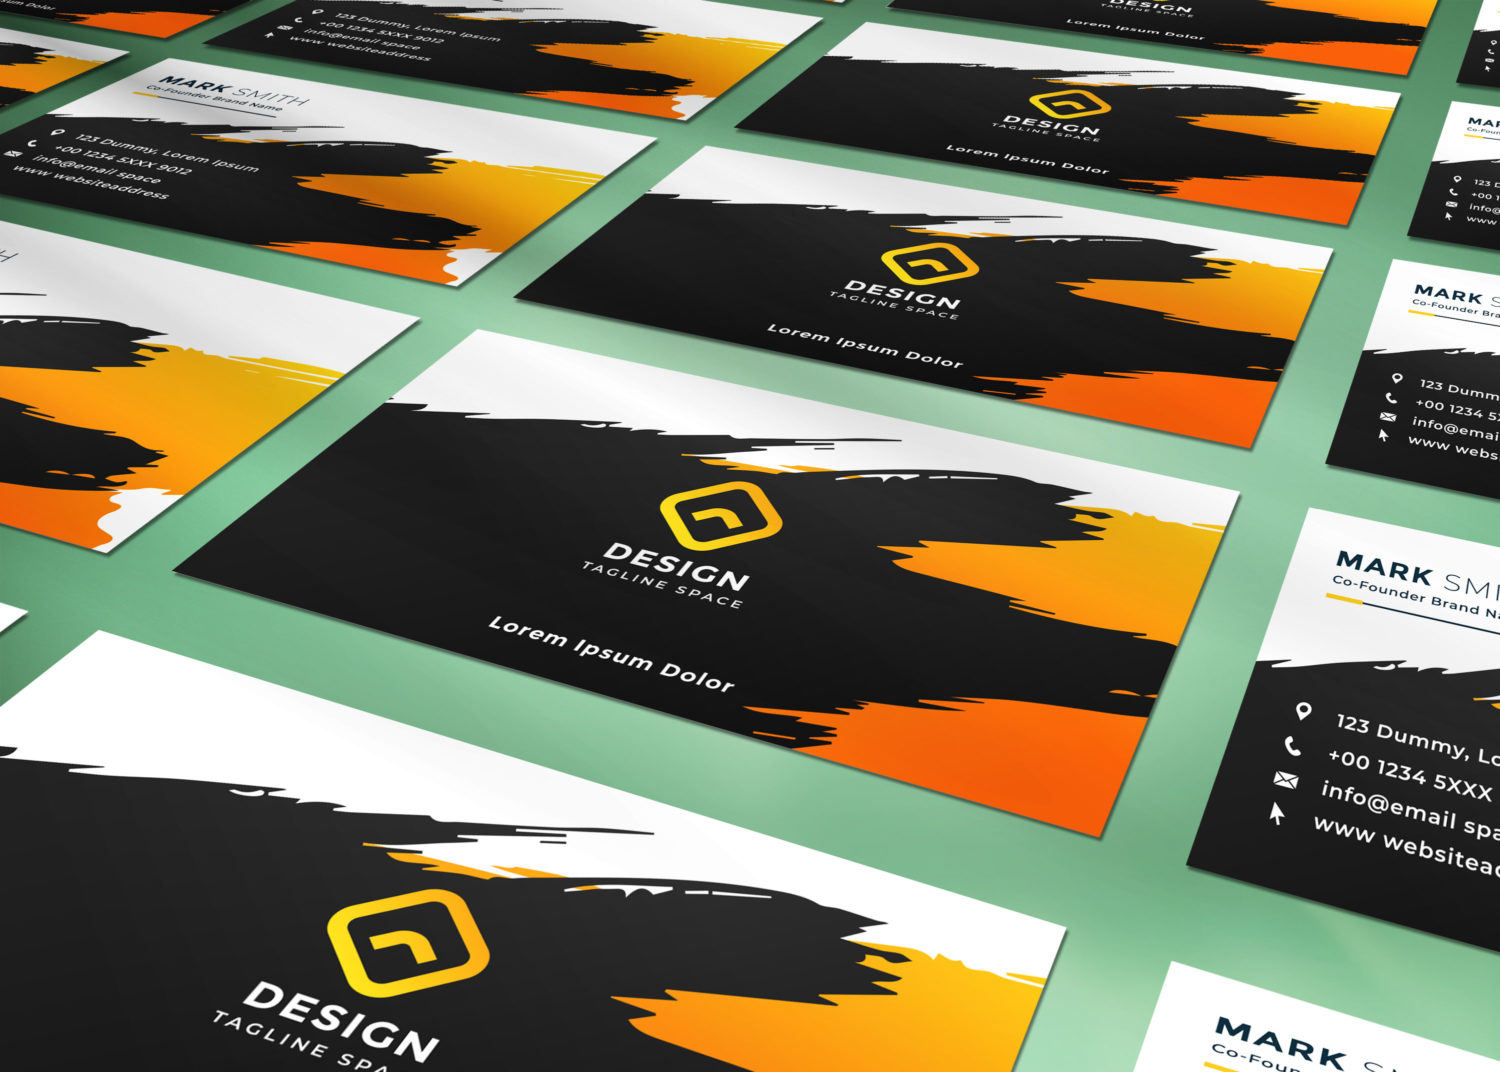 New Business Card Mockups